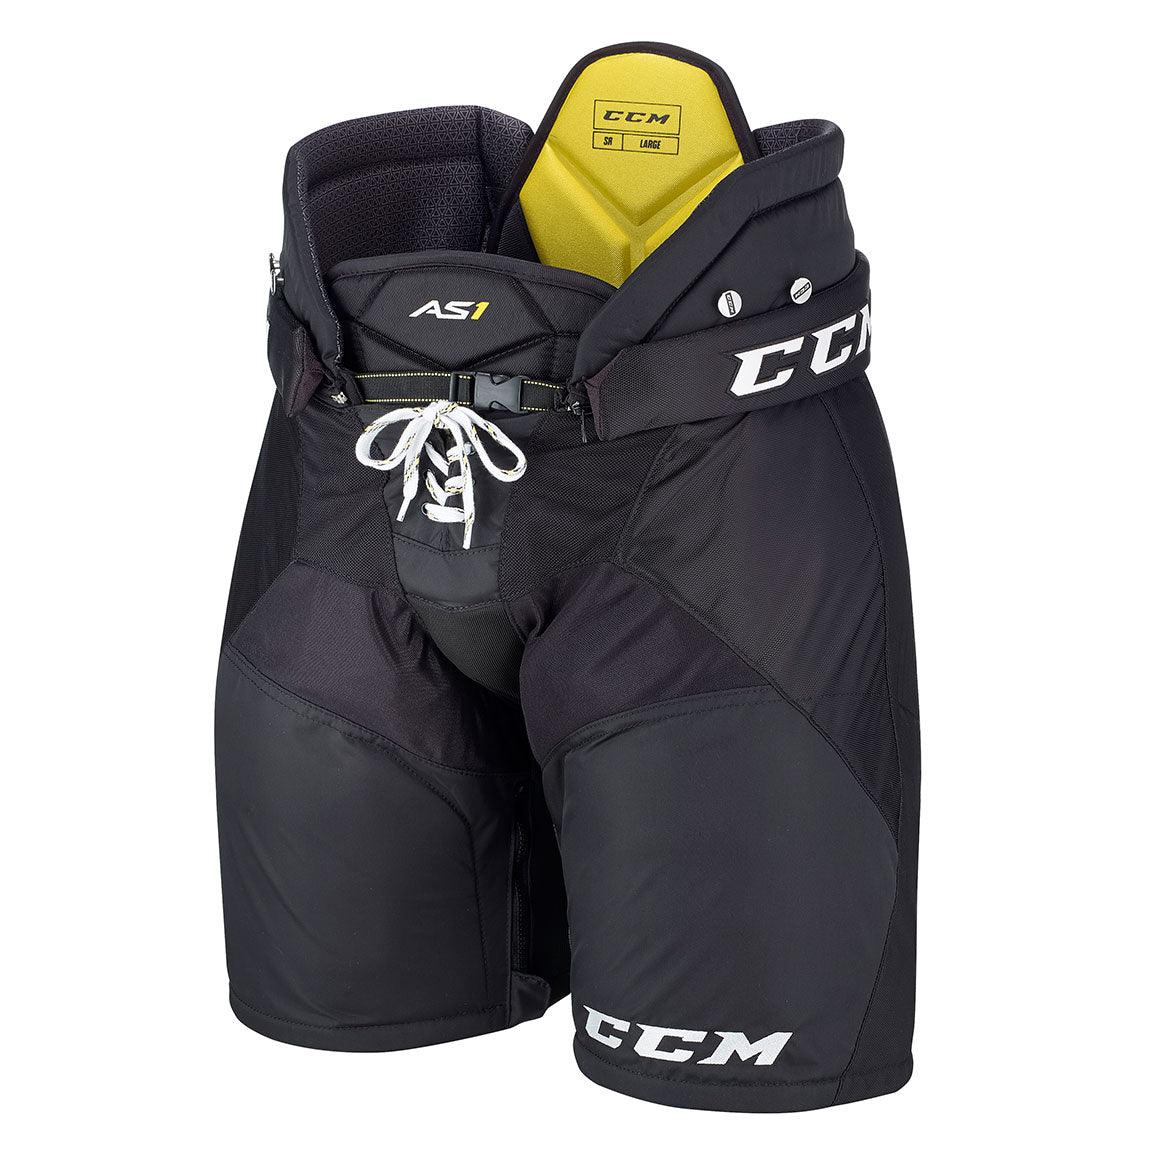 Super Tacks AS1 Hockey Pants - Youth - Sports Excellence